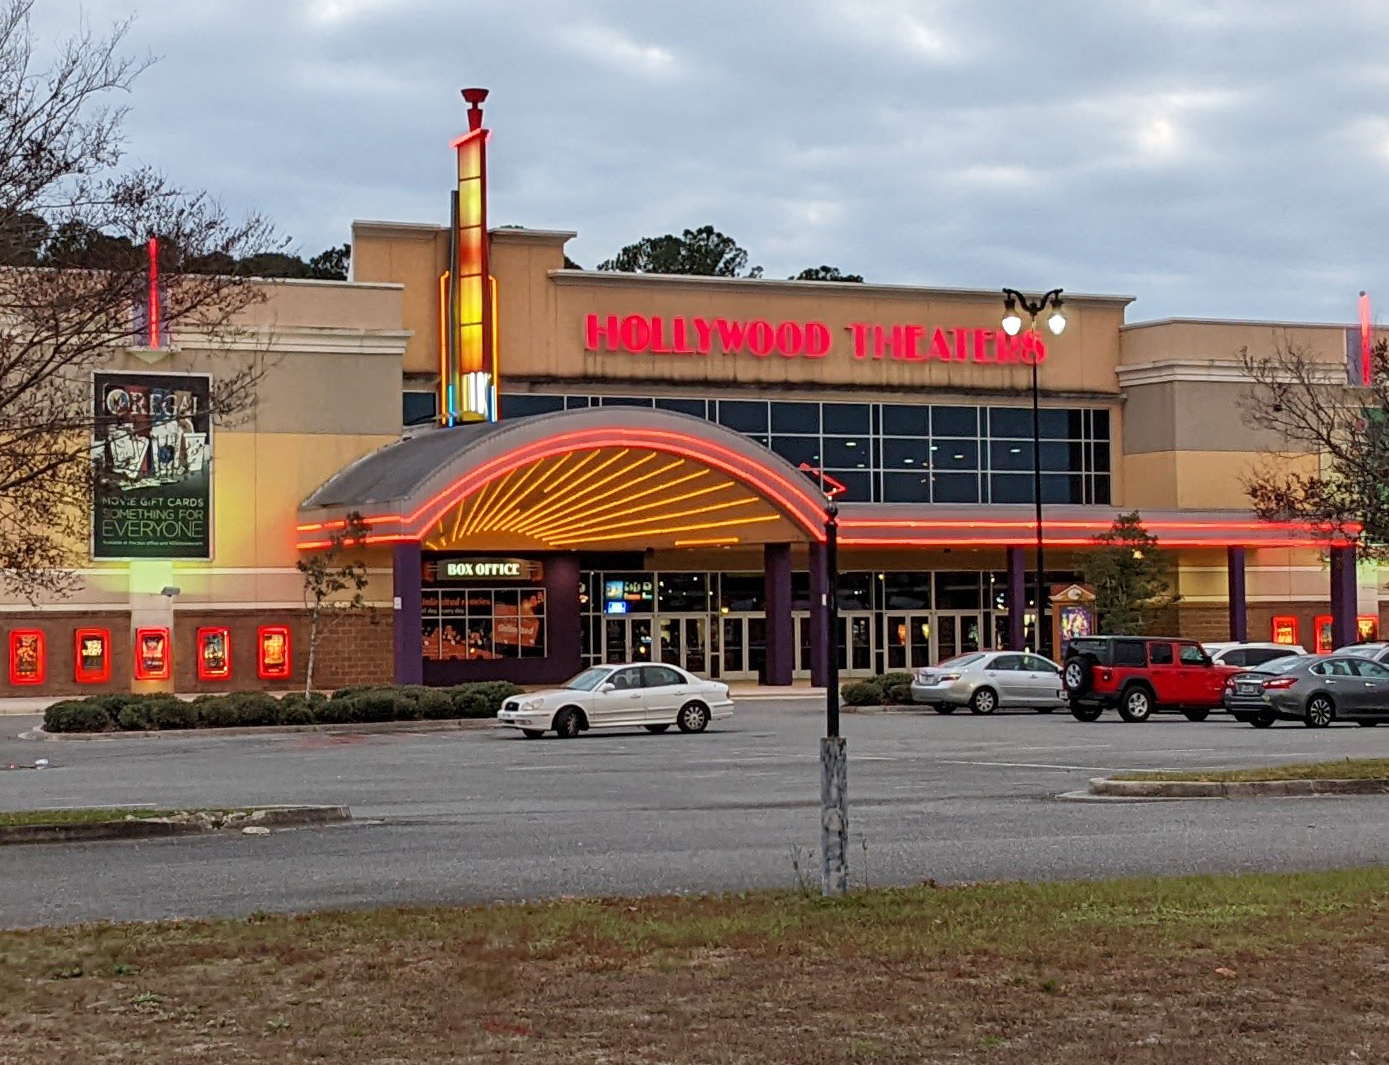 Regal River City Marketplace will be demolished to make way for the BJ's. The theater is still open.